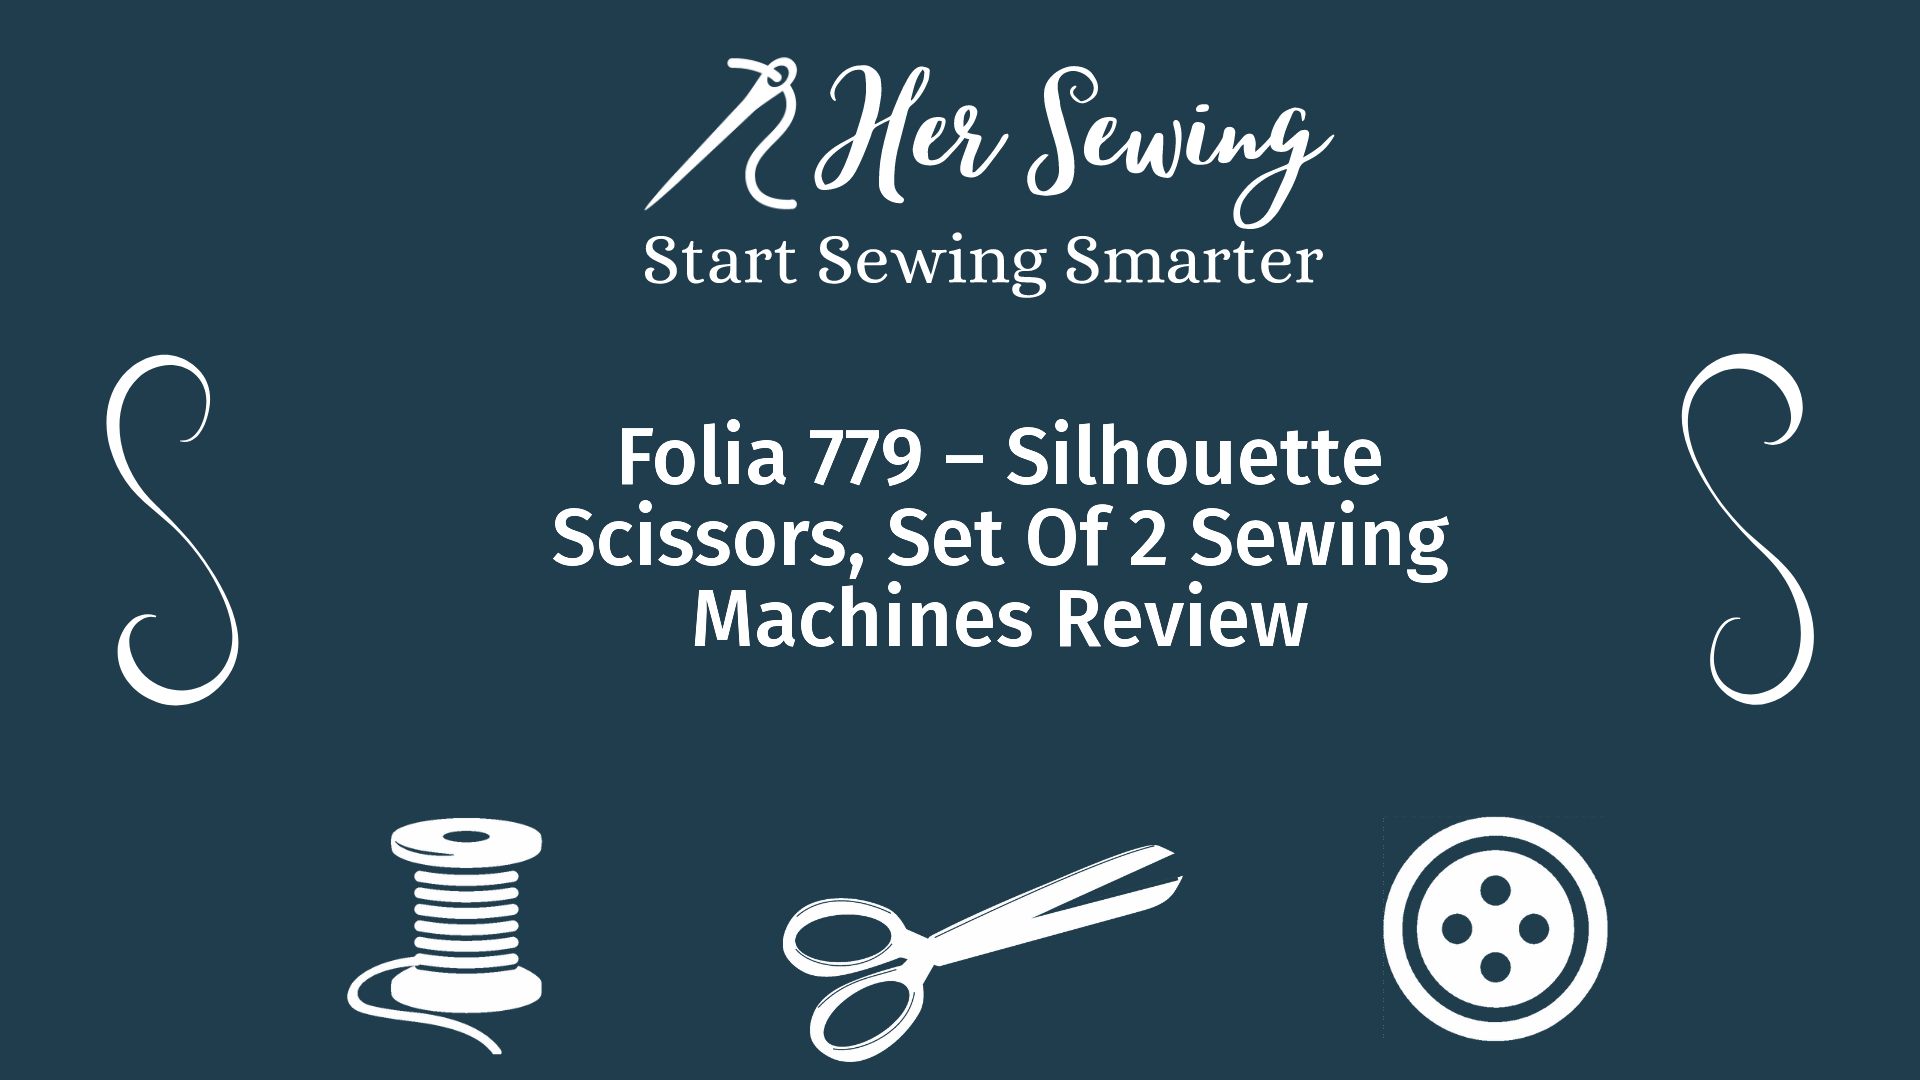 Folia 779 – Silhouette Scissors, Set Of 2 Sewing Machines Review